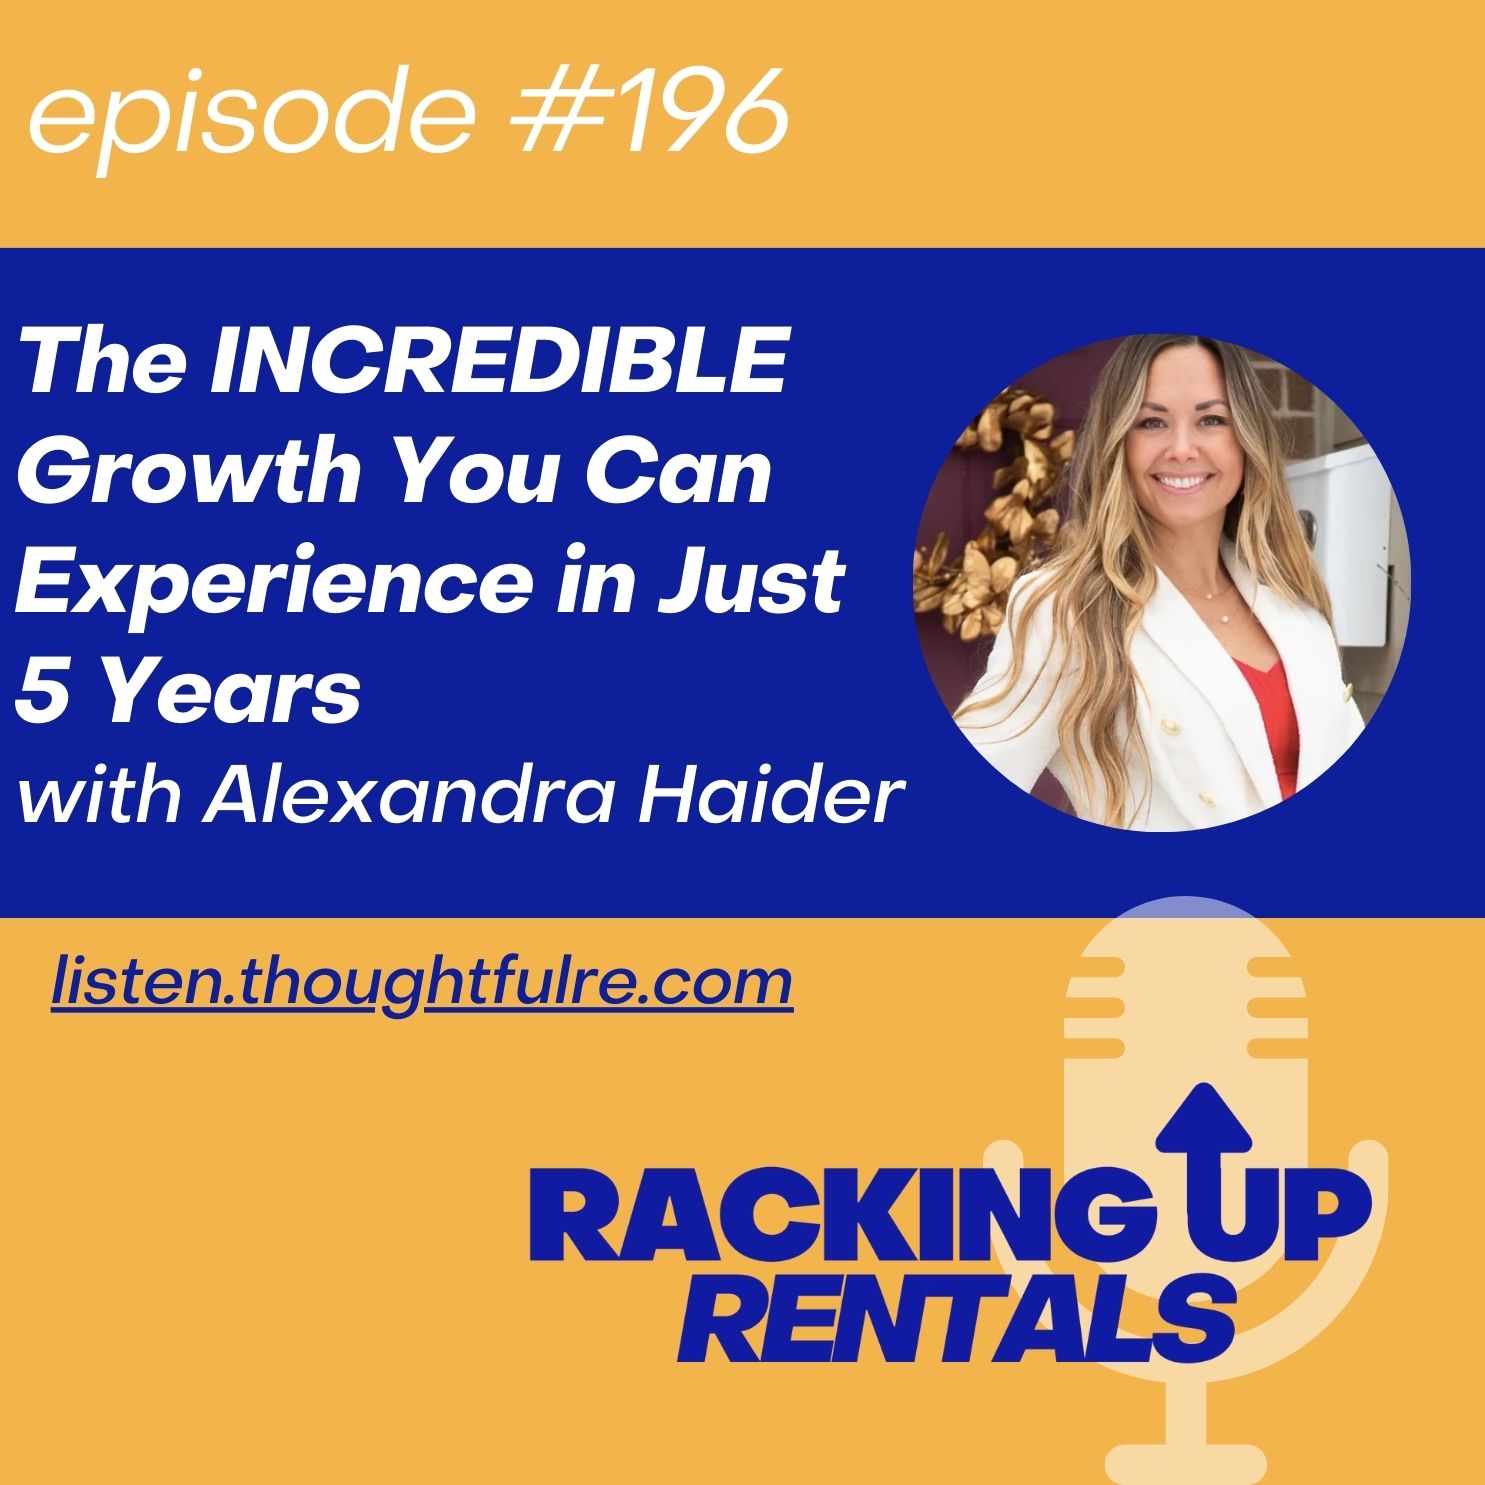 The INCREDIBLE Growth You Can Experience in Just 5 Years, with Alexandra Haider